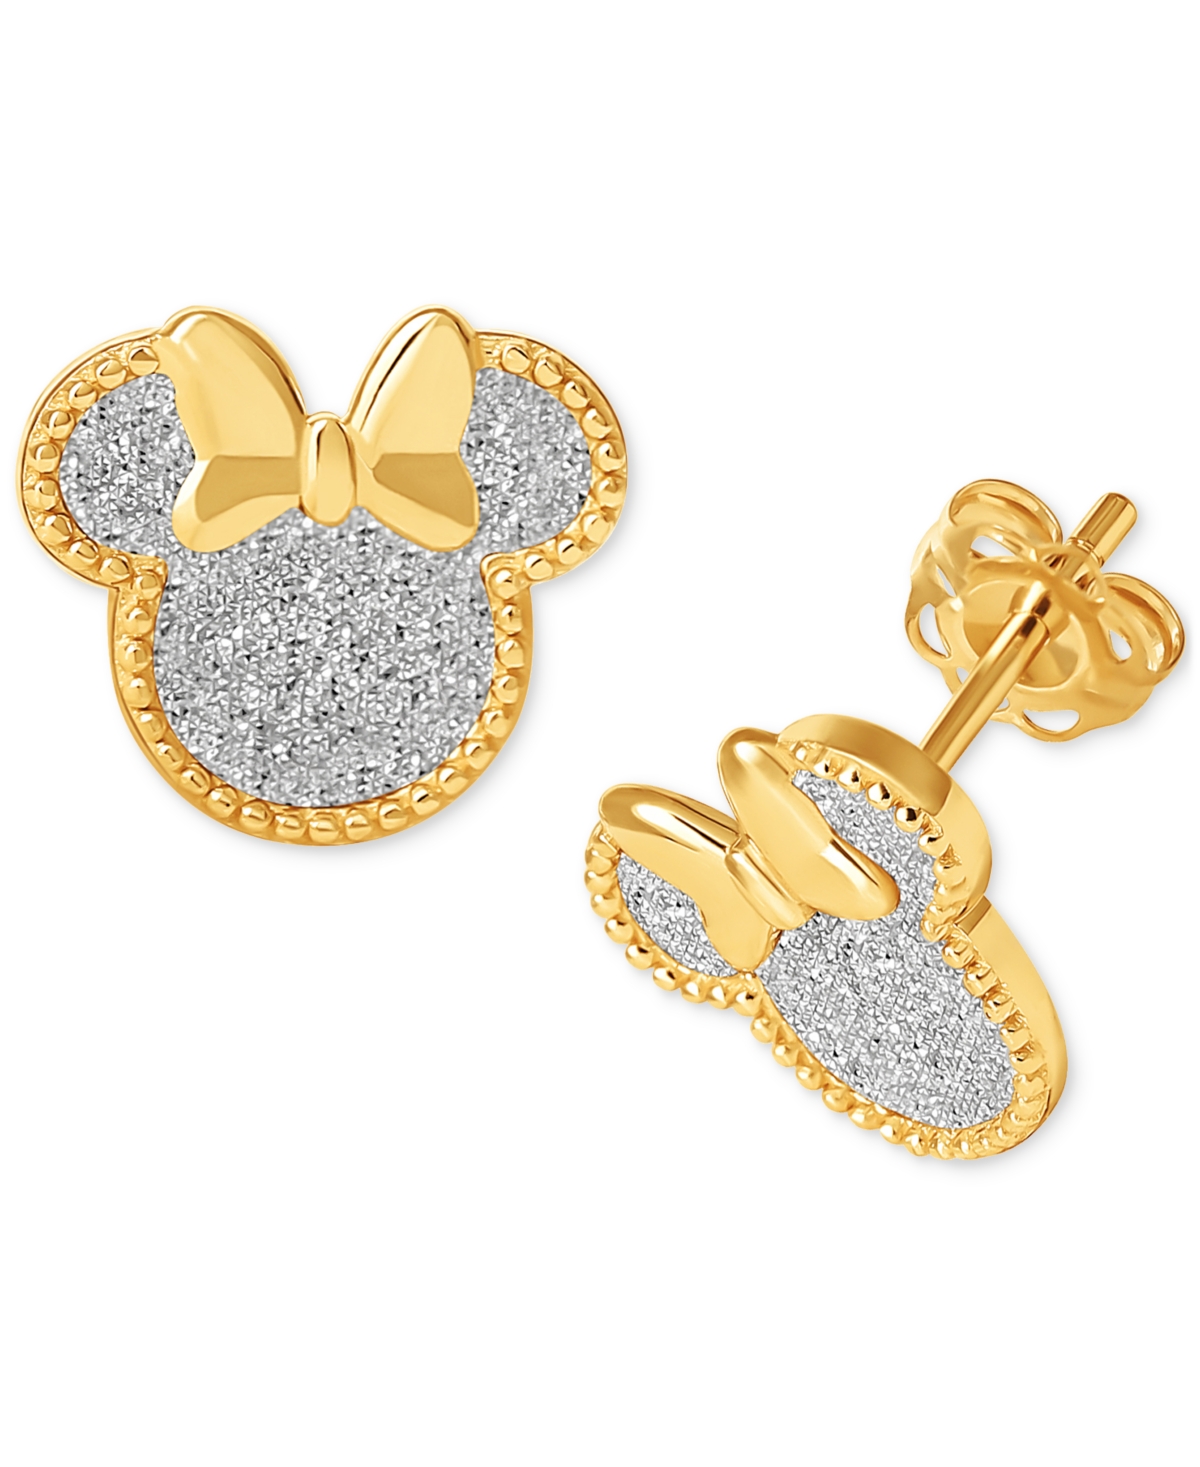 Minnie Mouse Glitter Stud Earrings in 18k Gold-Plated Sterling Silver - Gold Over Silver